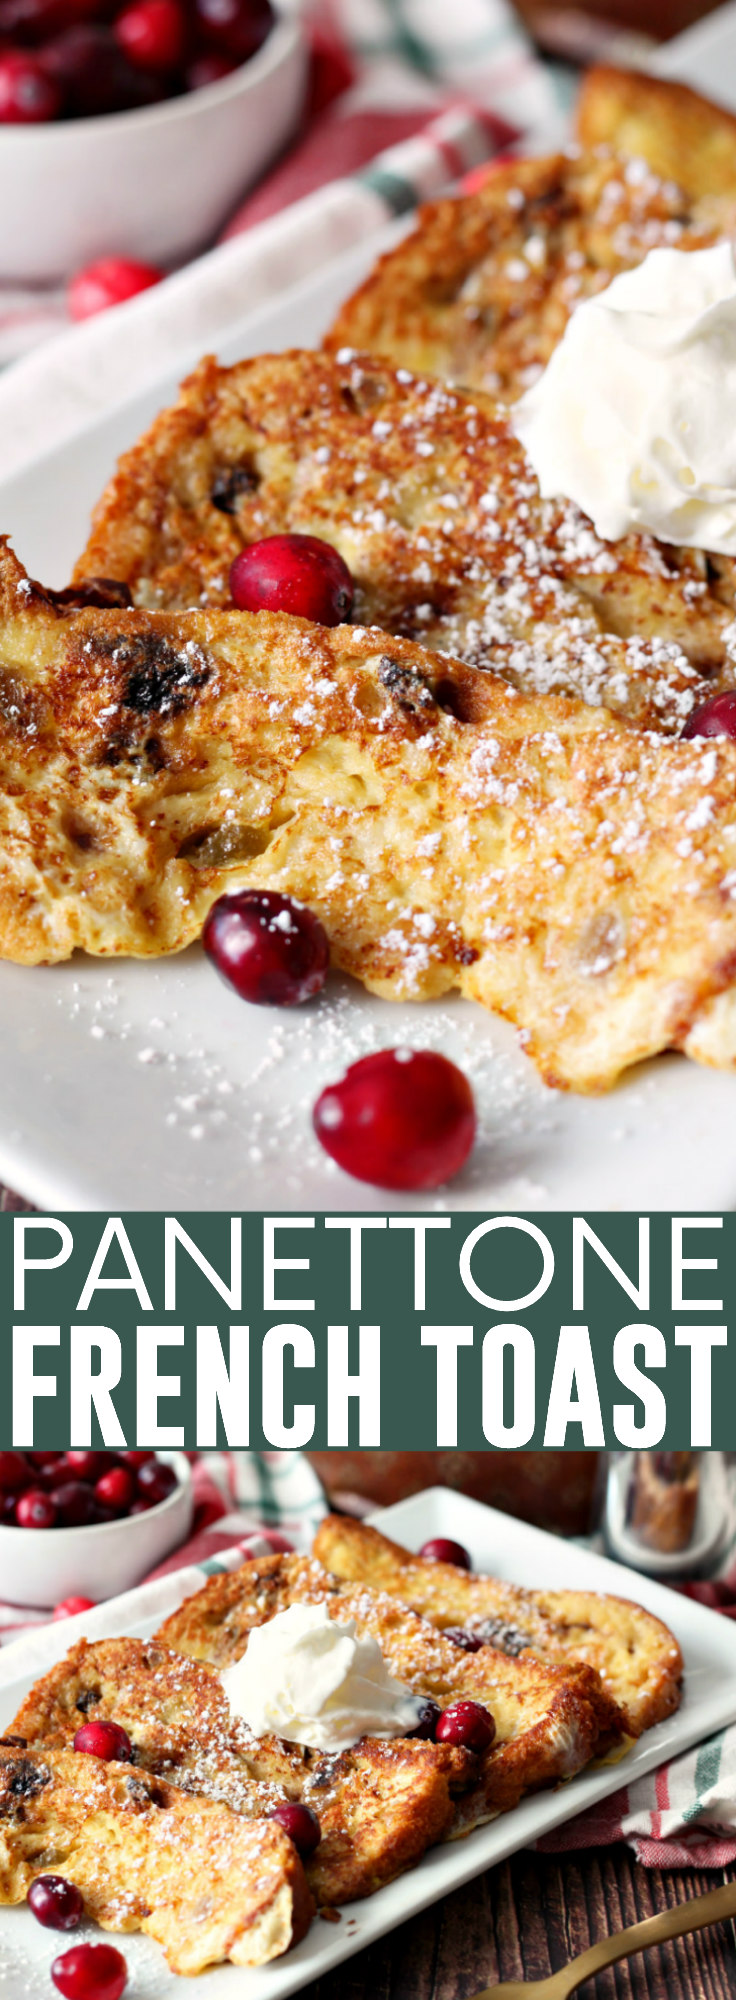 Panettone French Toast pinnable image.